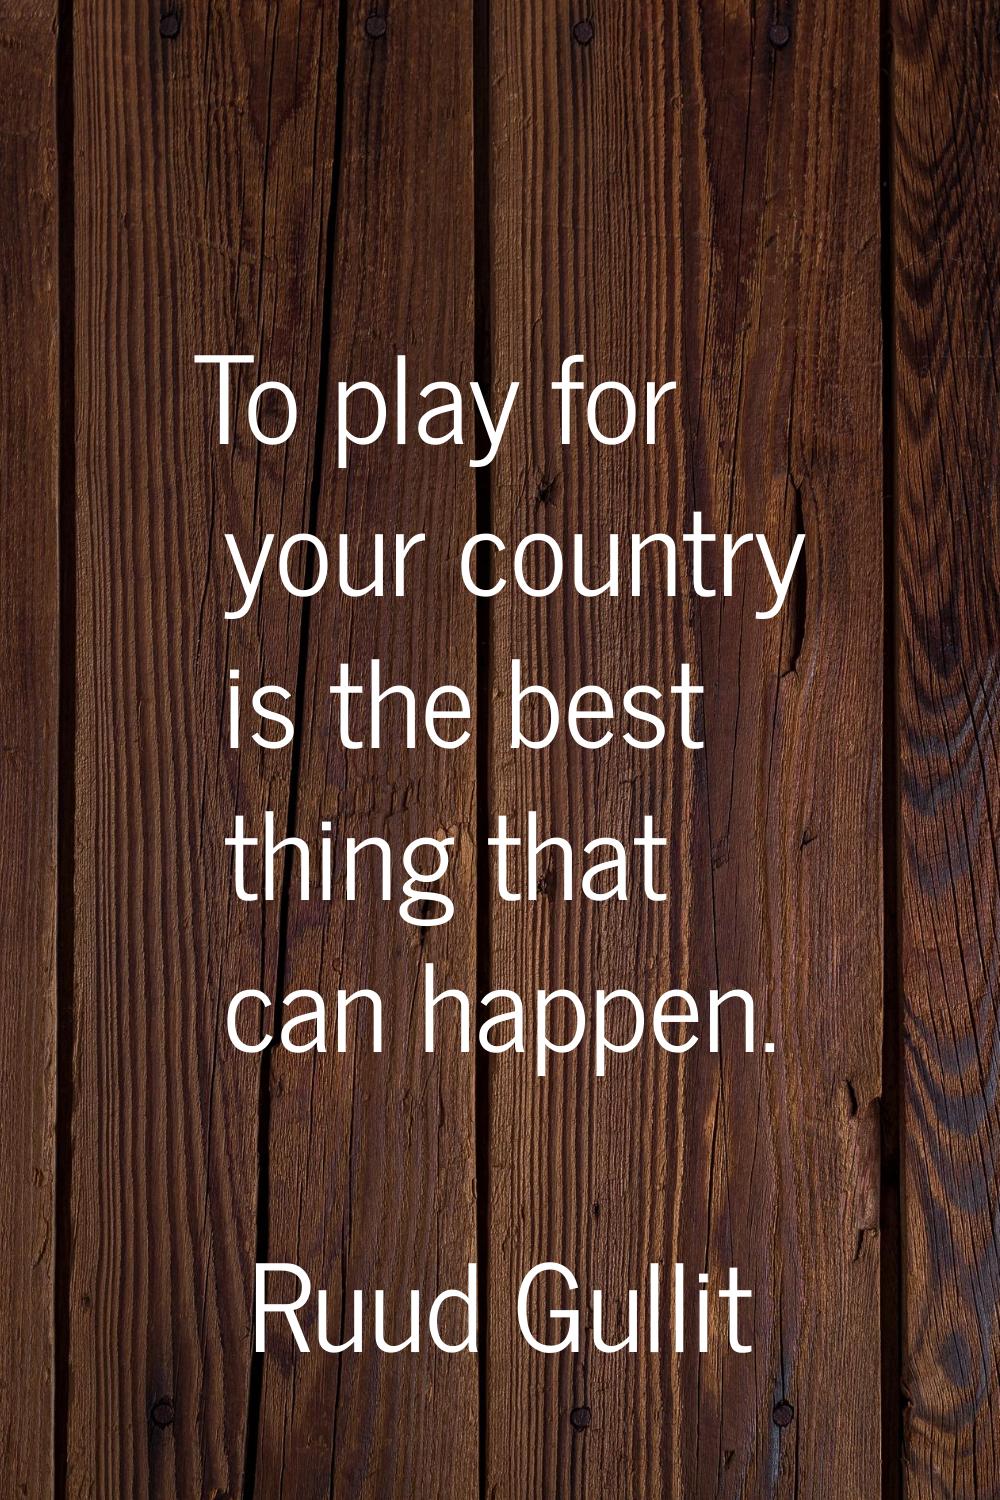 To play for your country is the best thing that can happen.